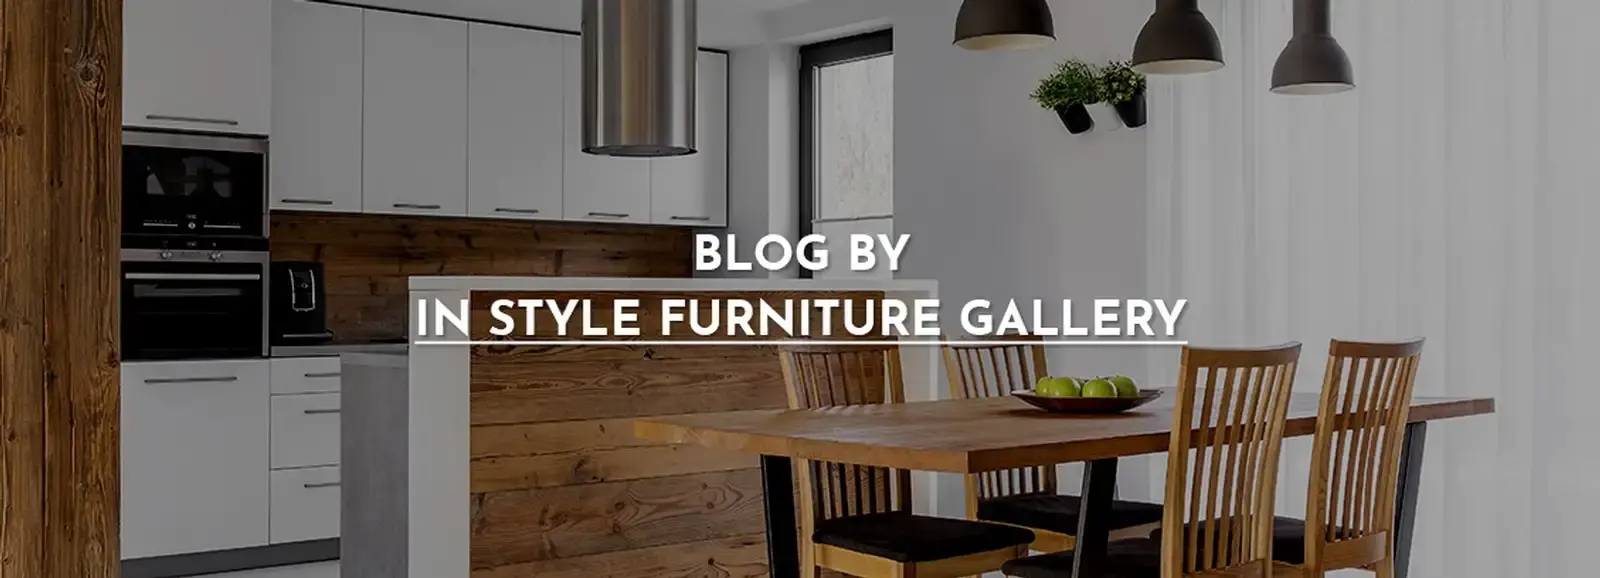 Blog by In Style Furniture Gallery